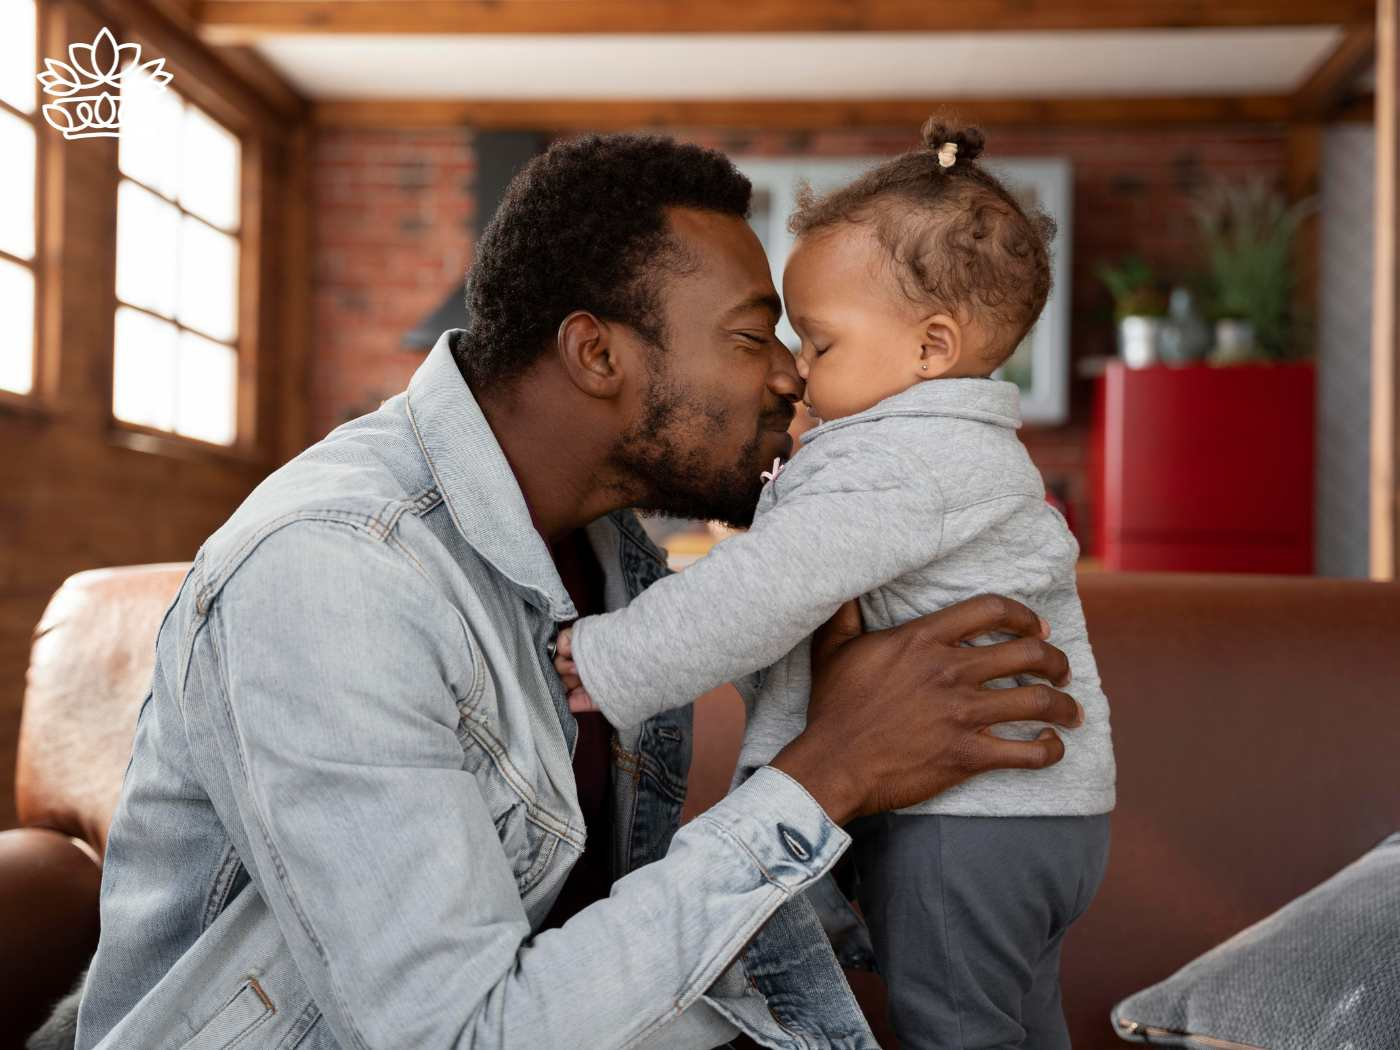 Tender moment between father and child in a cozy space with coffee, celebrated during the holiday with Fabulous Flowers and Gifts' Father's Day Collection.